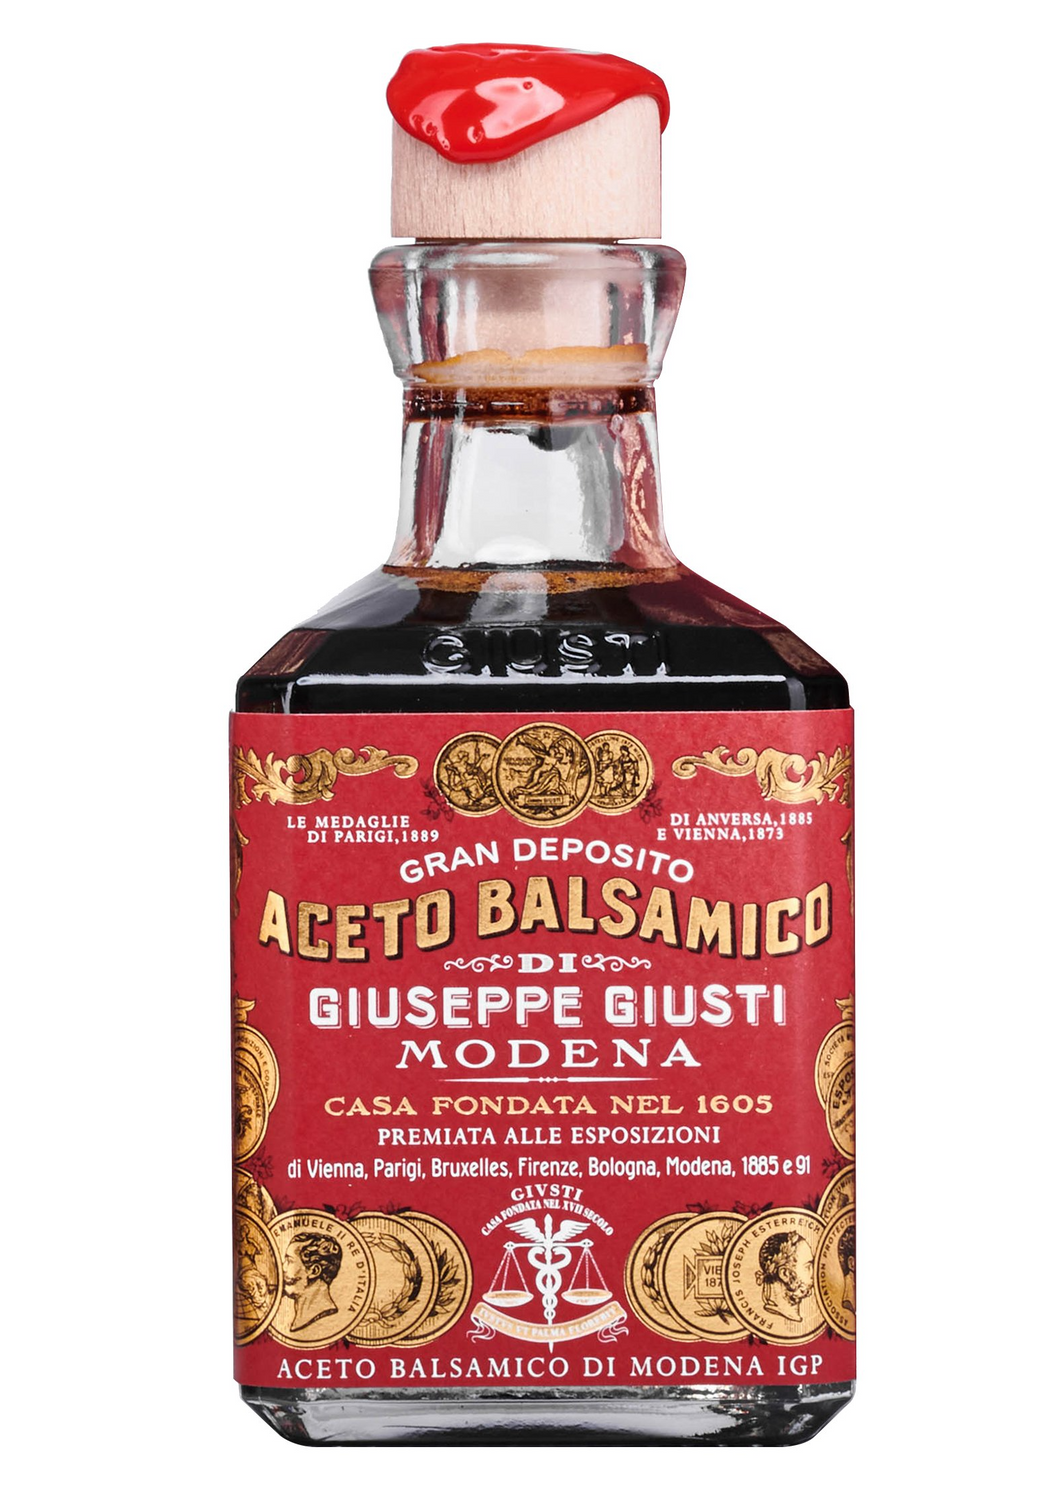 Giusti - Red Label - 15 years aged - 100 / 250ml